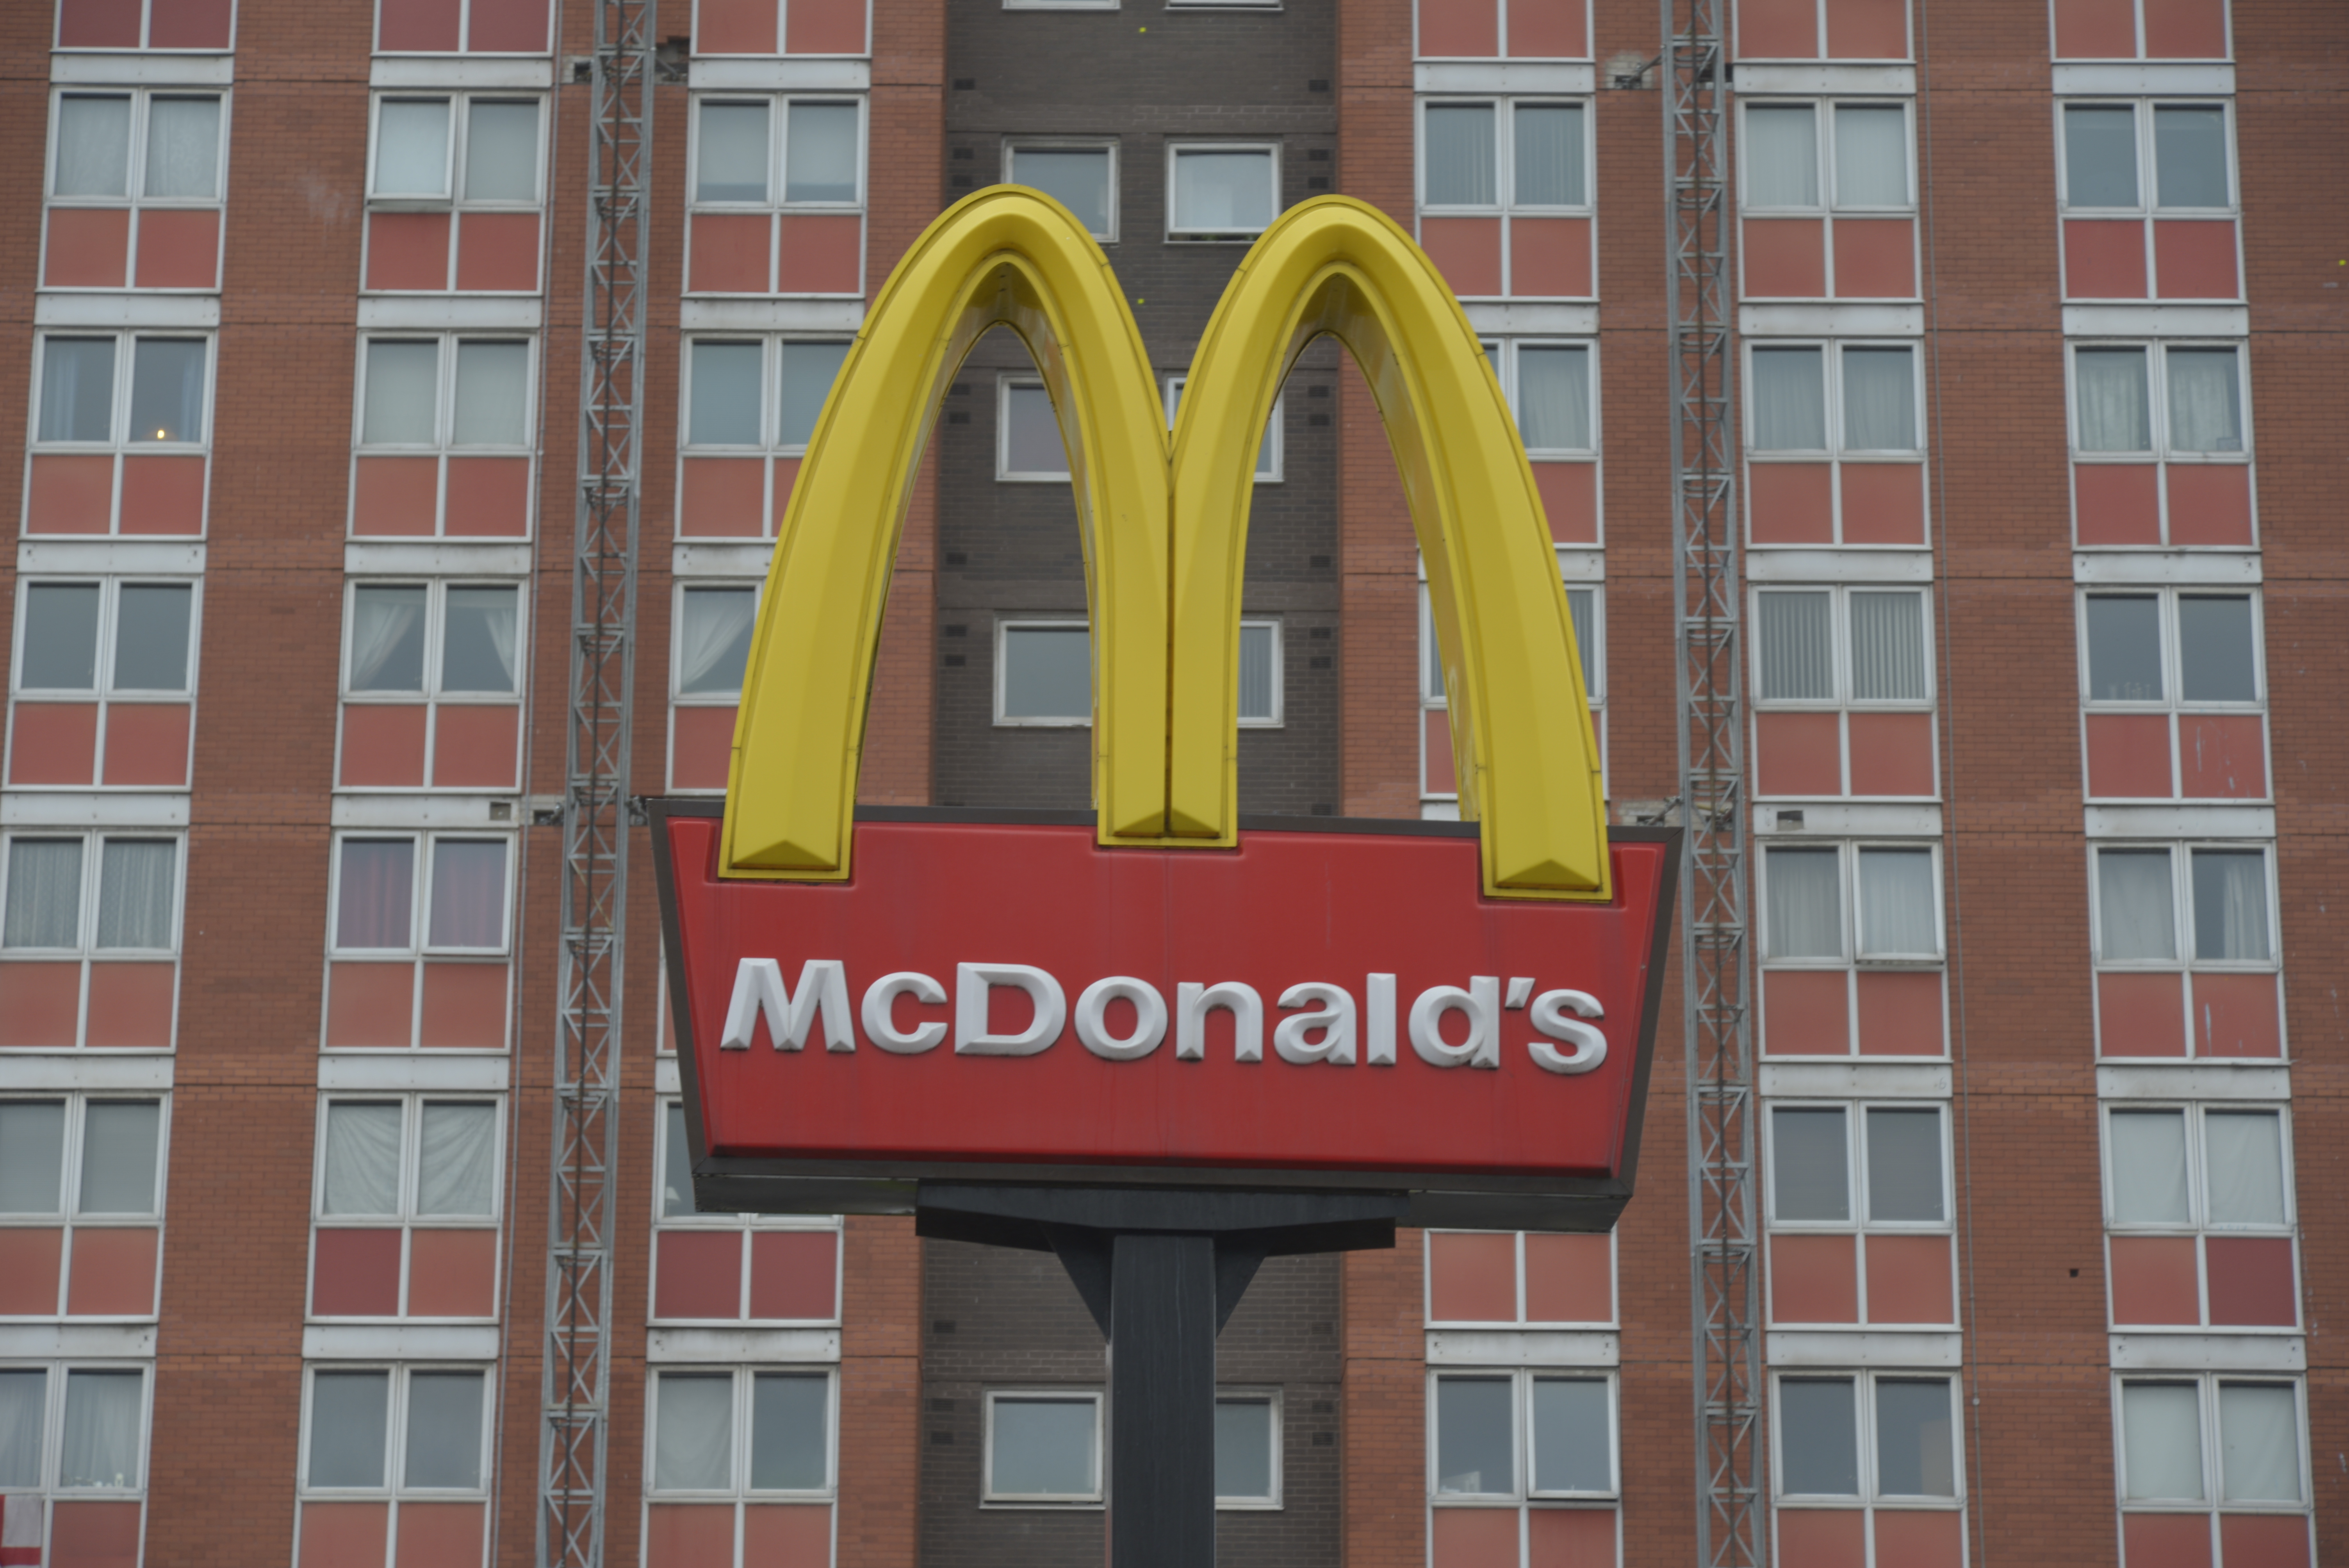 A Teen Ordered a McDonald’s Burger With no Bun, Toppings, or Patty and They Still Charged Her